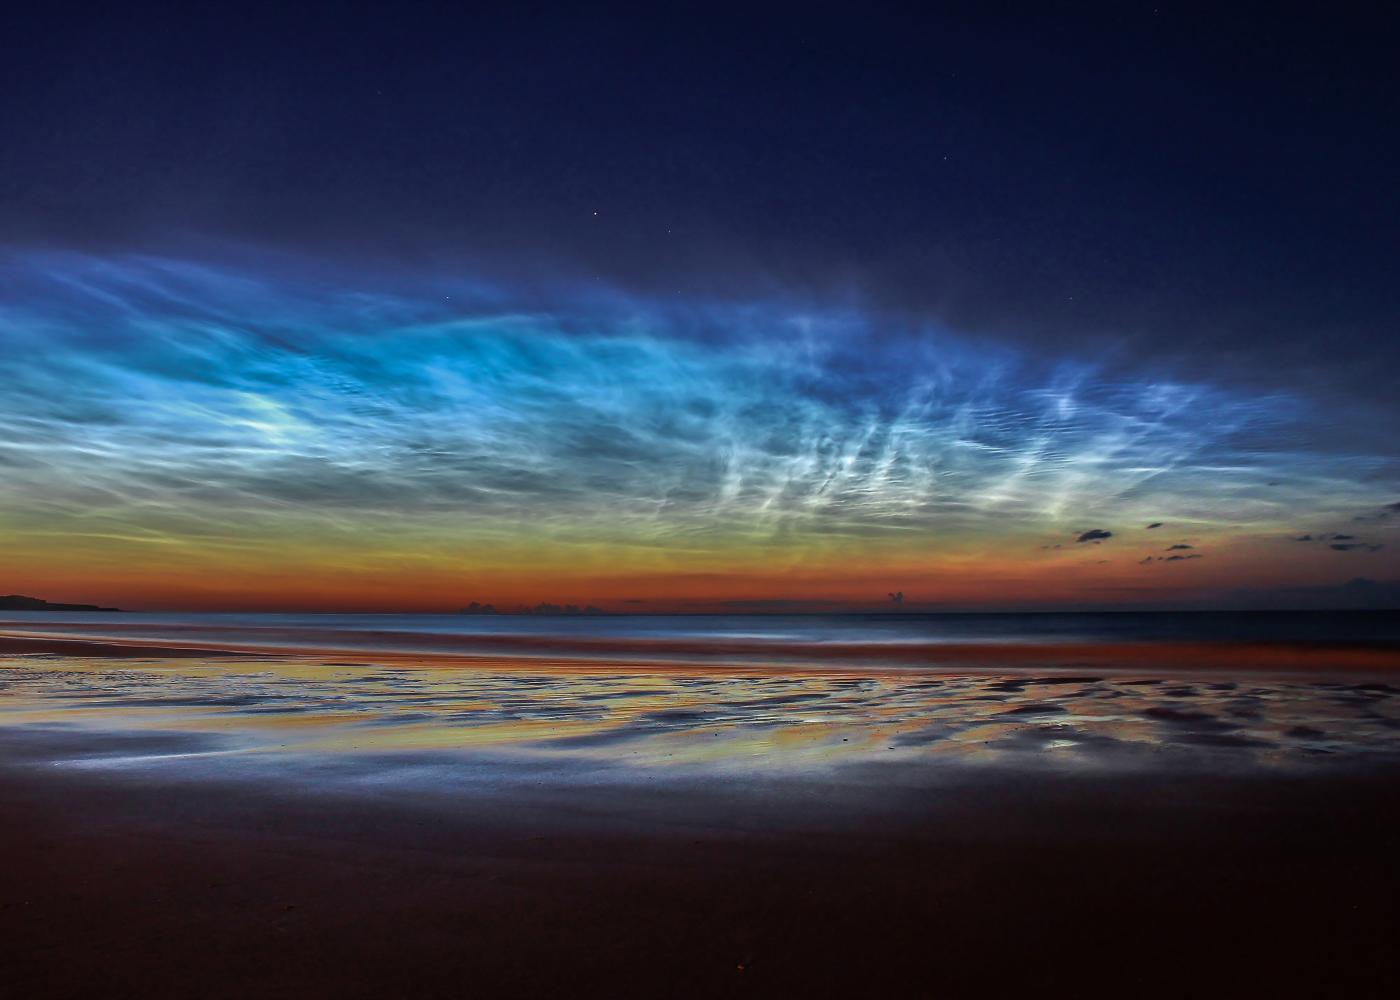 An image showing 'Sunderland Noctilucent Cloud display by Matt Robinson - Astronomy Photographer of the Year 2015'